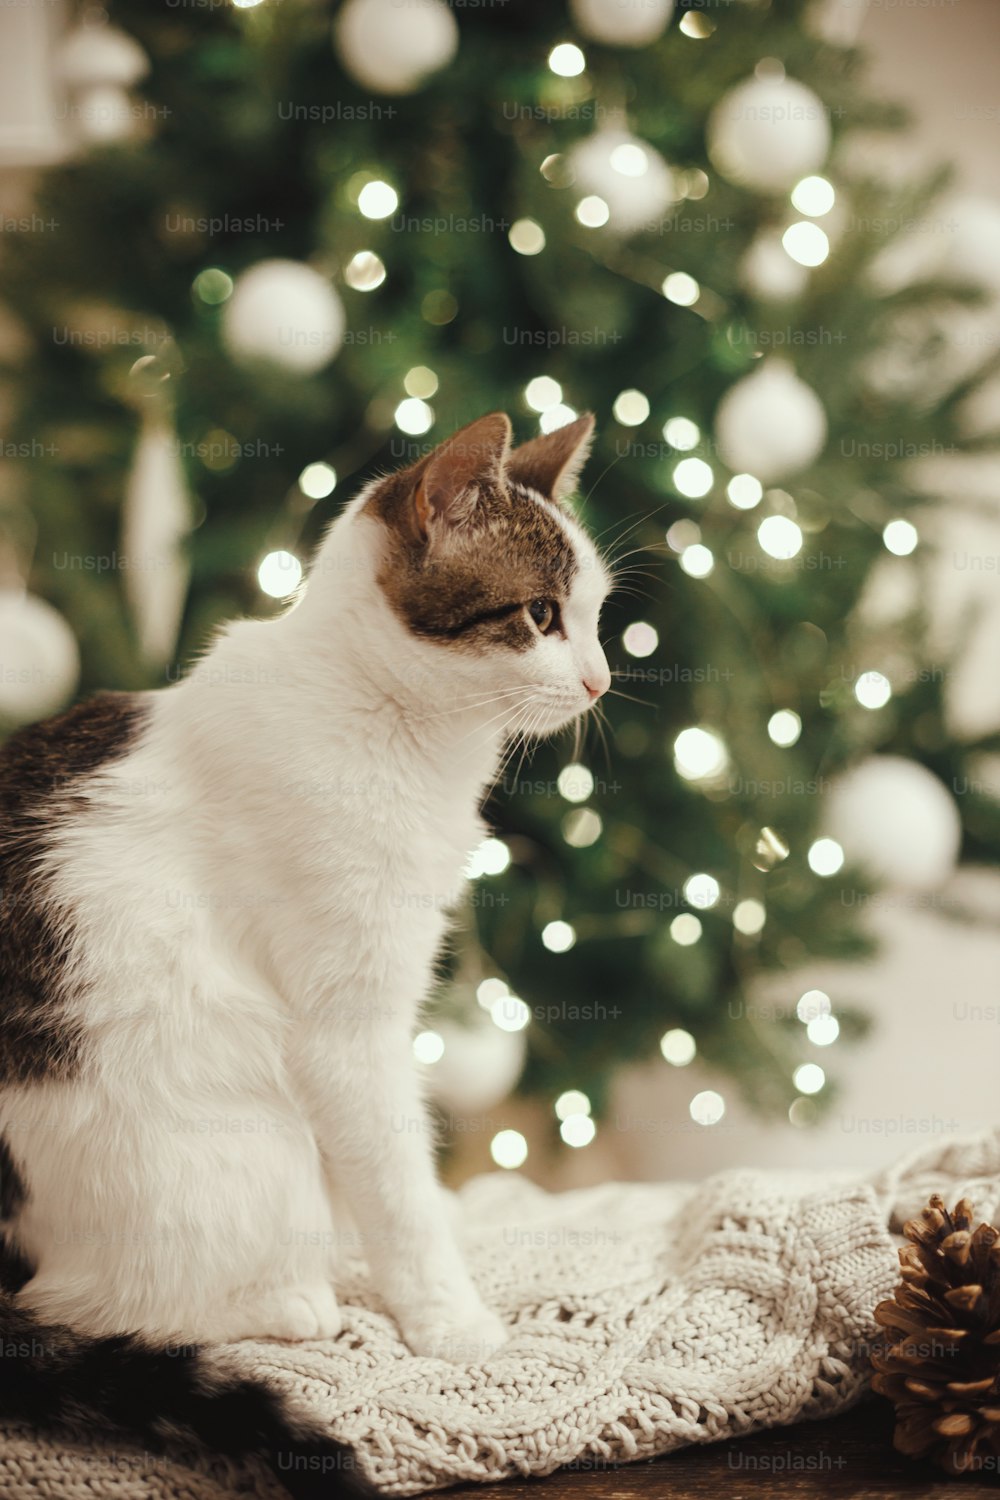 Adorable cat sitting on cozy knitted sweater with pine cone on background of christmas tree lights. Cute kitten with curious look in  festive decorated scandinavian room. Pet and winter holidays